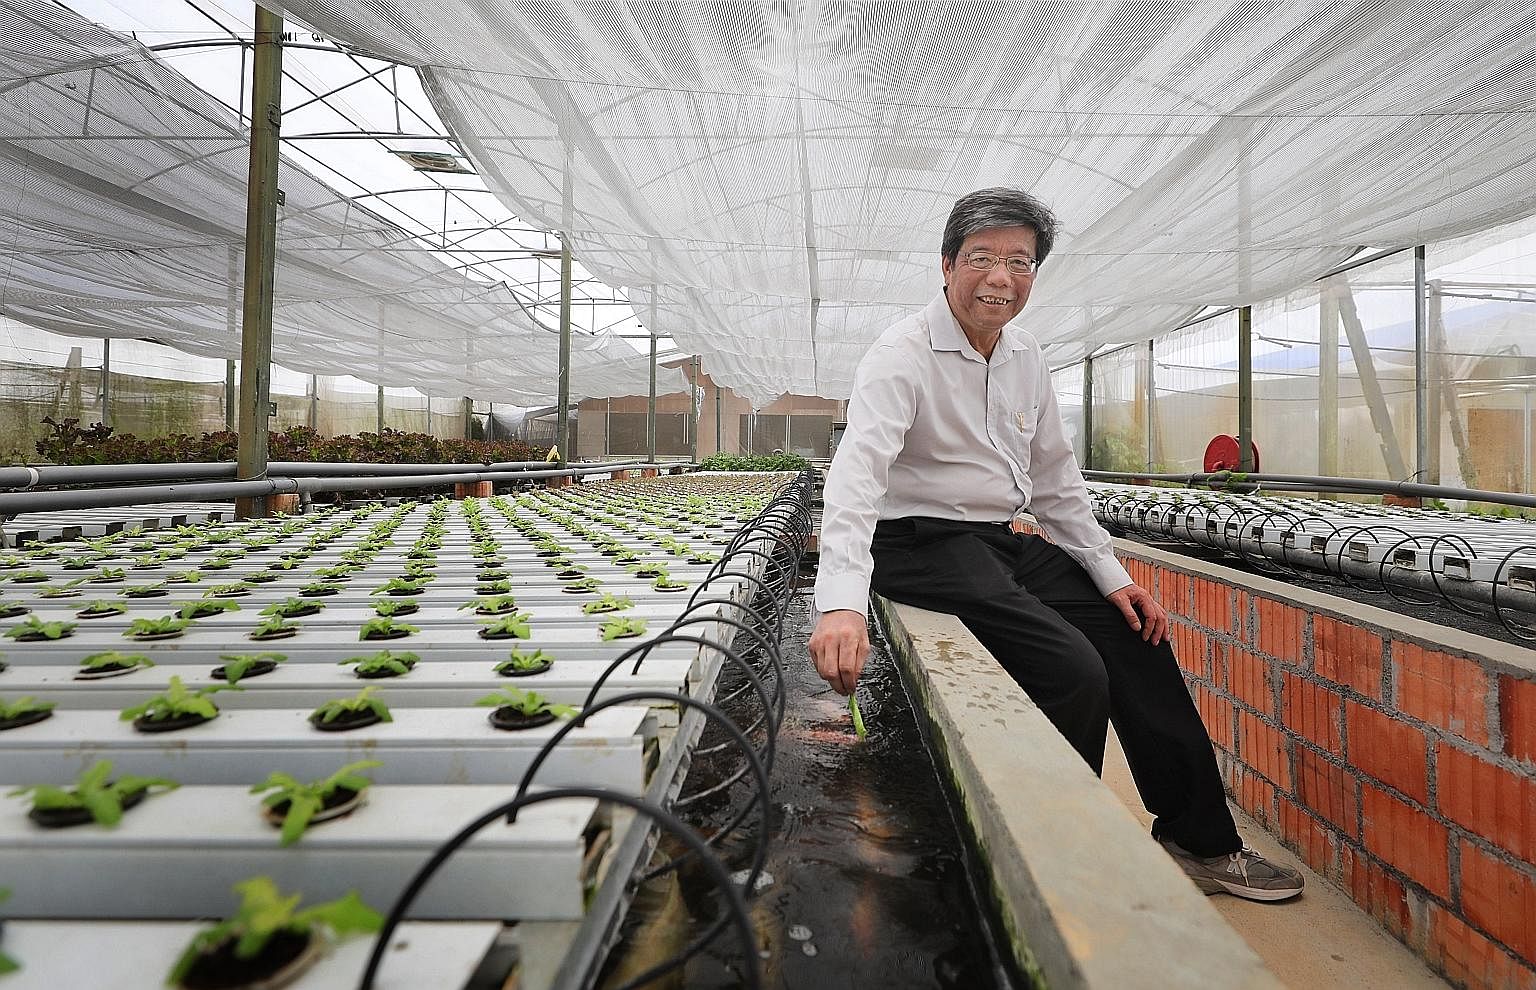 A pig farm in the Punggol area in the early 1980s. Pig farms were phased out in the 1980s due to land scarcity and extensive water pollution from pig waste. Mr Joseph Phua uses an aquaponic system to grow vegetables and rear fish at Orchidville farm 